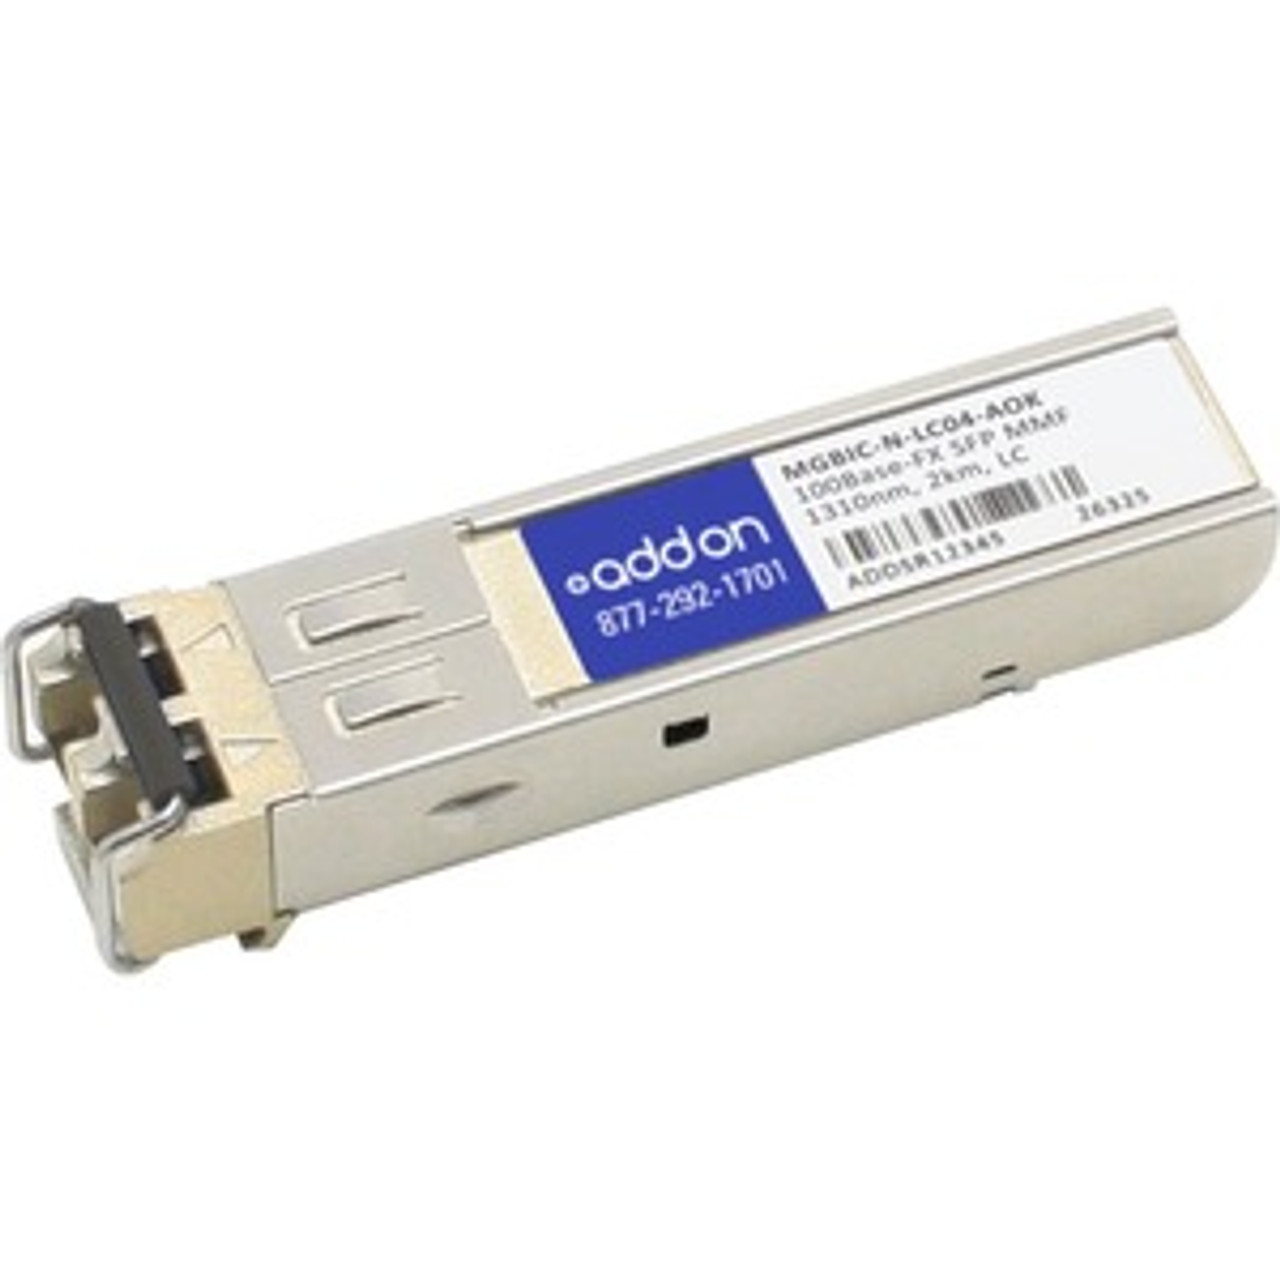 MGBIC-N-LC04-AOK AddOn 100Mbps 100Base-FX Multi-mode Fiber 2km 1310nm LC Connector SFP Transceiver Module